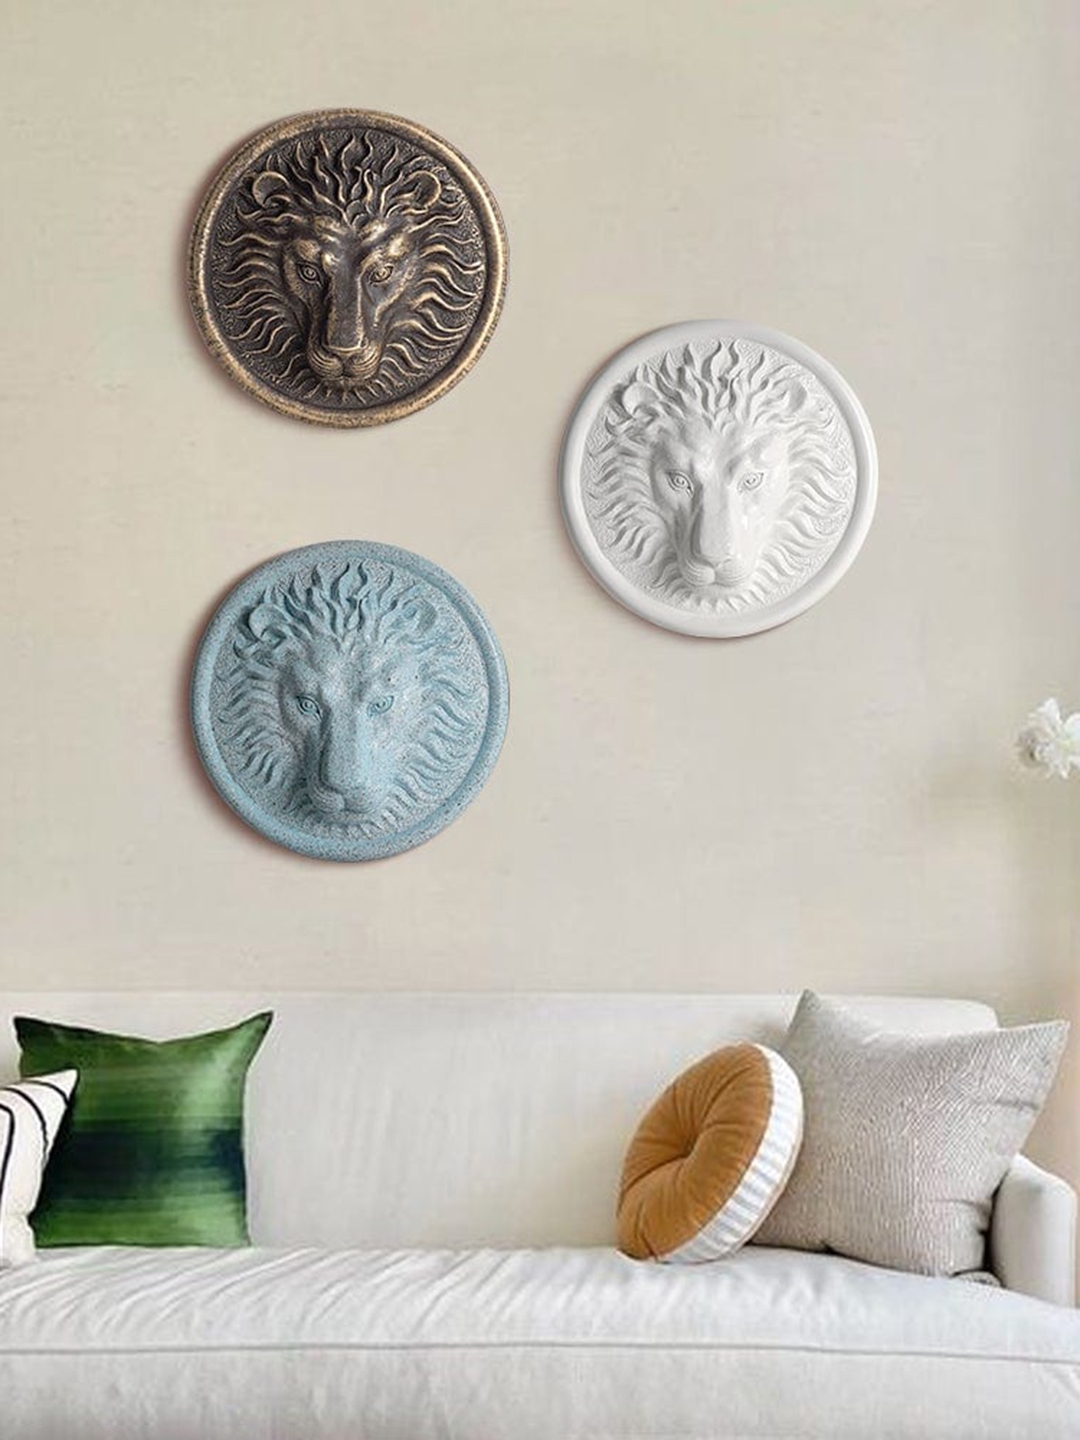 THE ARTMENT Set Of 3 Surreal Lion Head Wall Decor